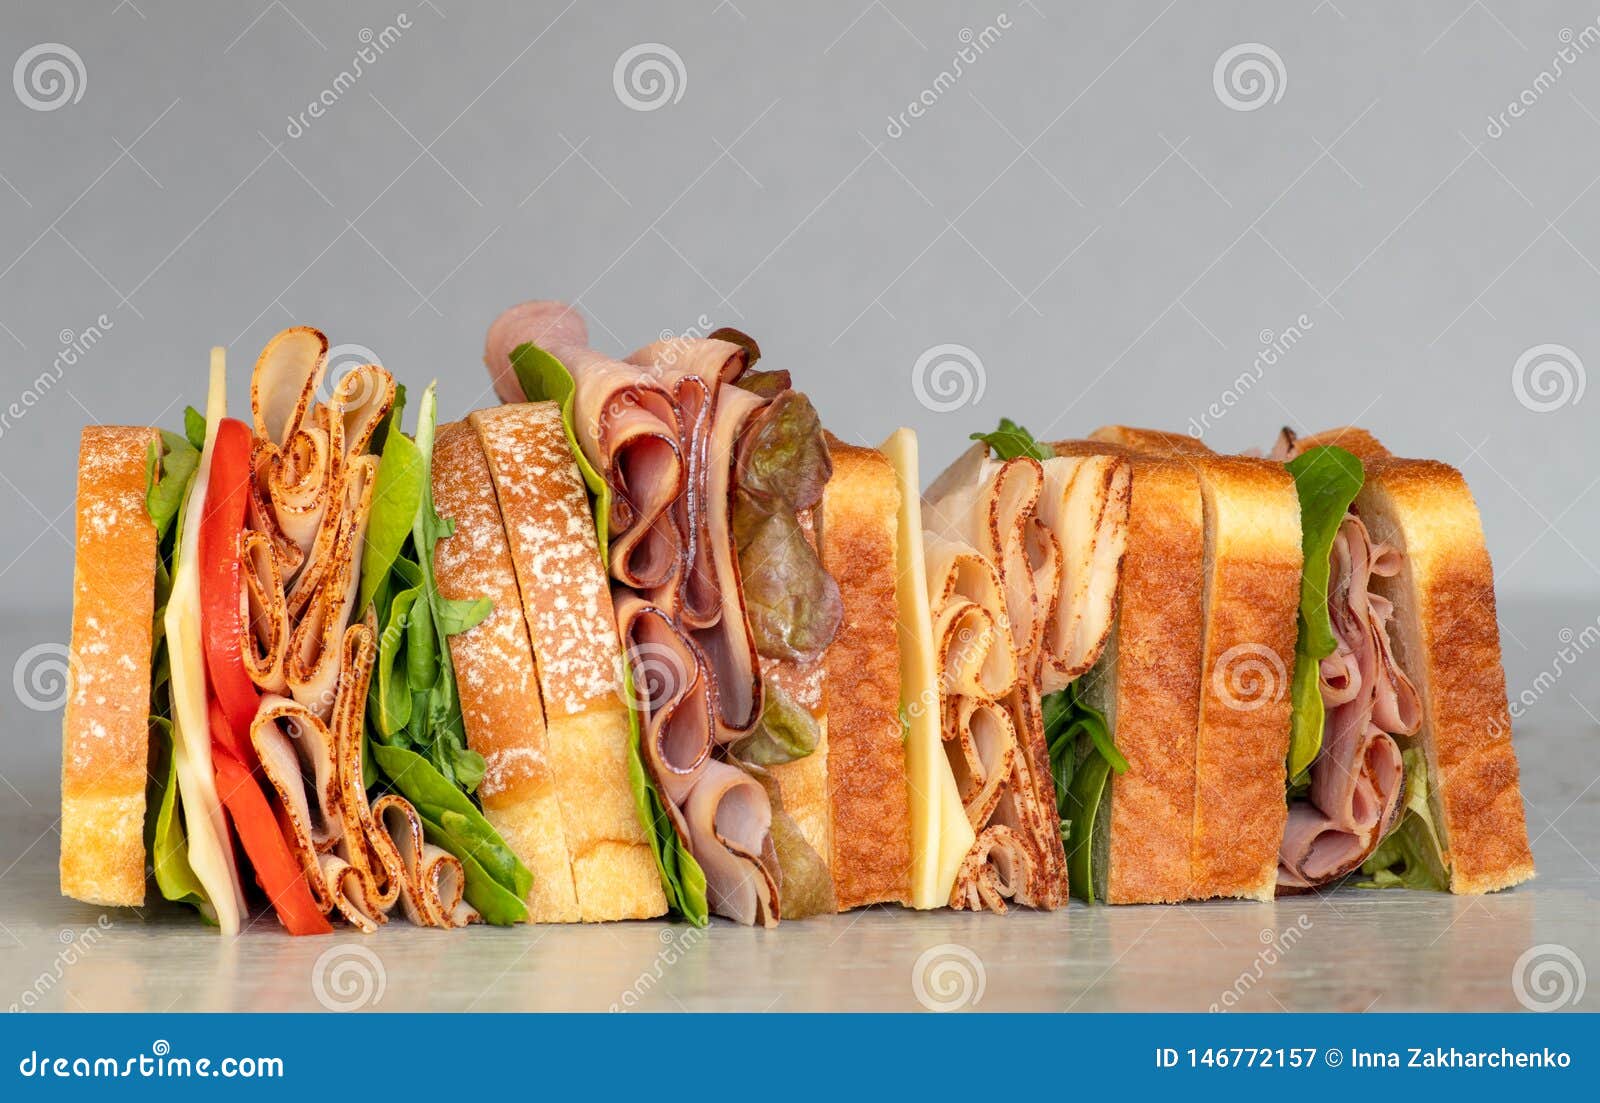 freshly made deli style sandwich with lettuce, several different kinds of vegetables, tomatoes, cheese, meats similar to ham,